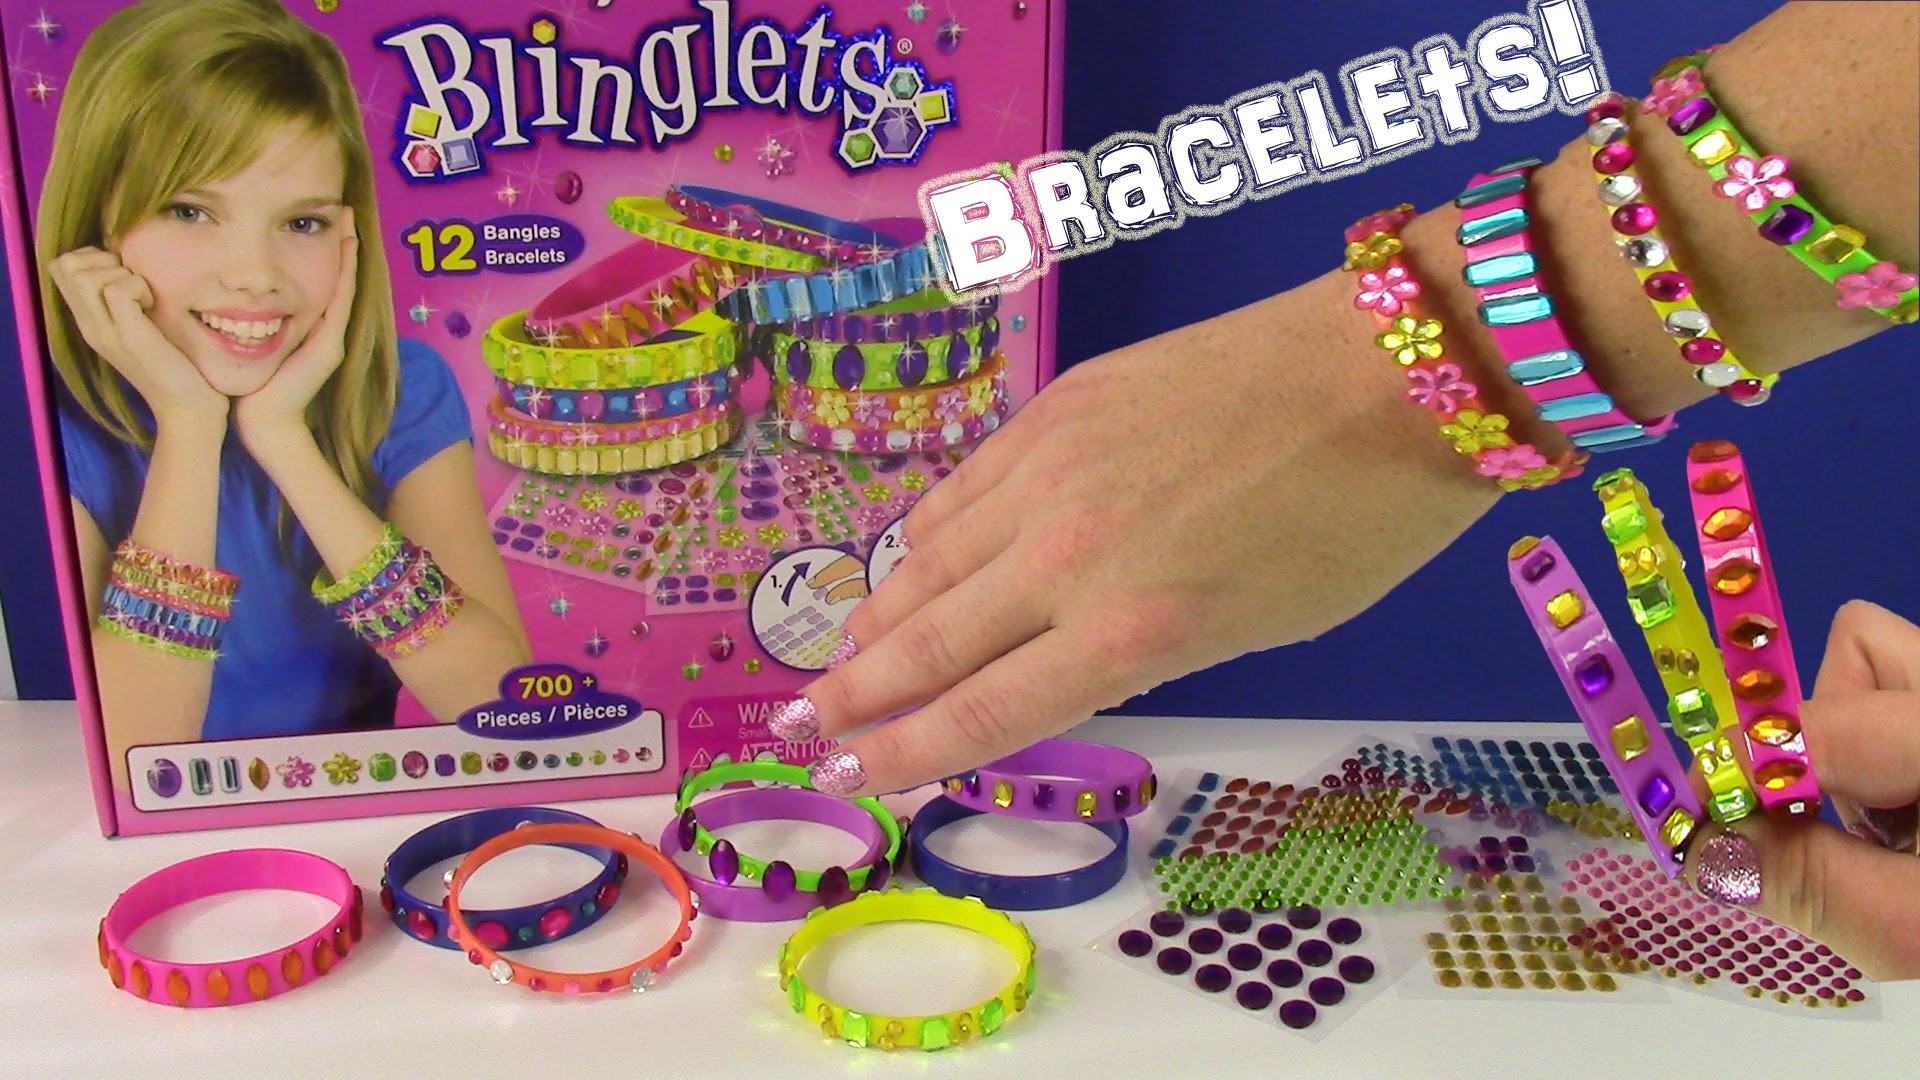 Stick 'N Style Blinglets! DIY Bangle Bracelets! Make Your Own Blinged Out Jewelry! FUN